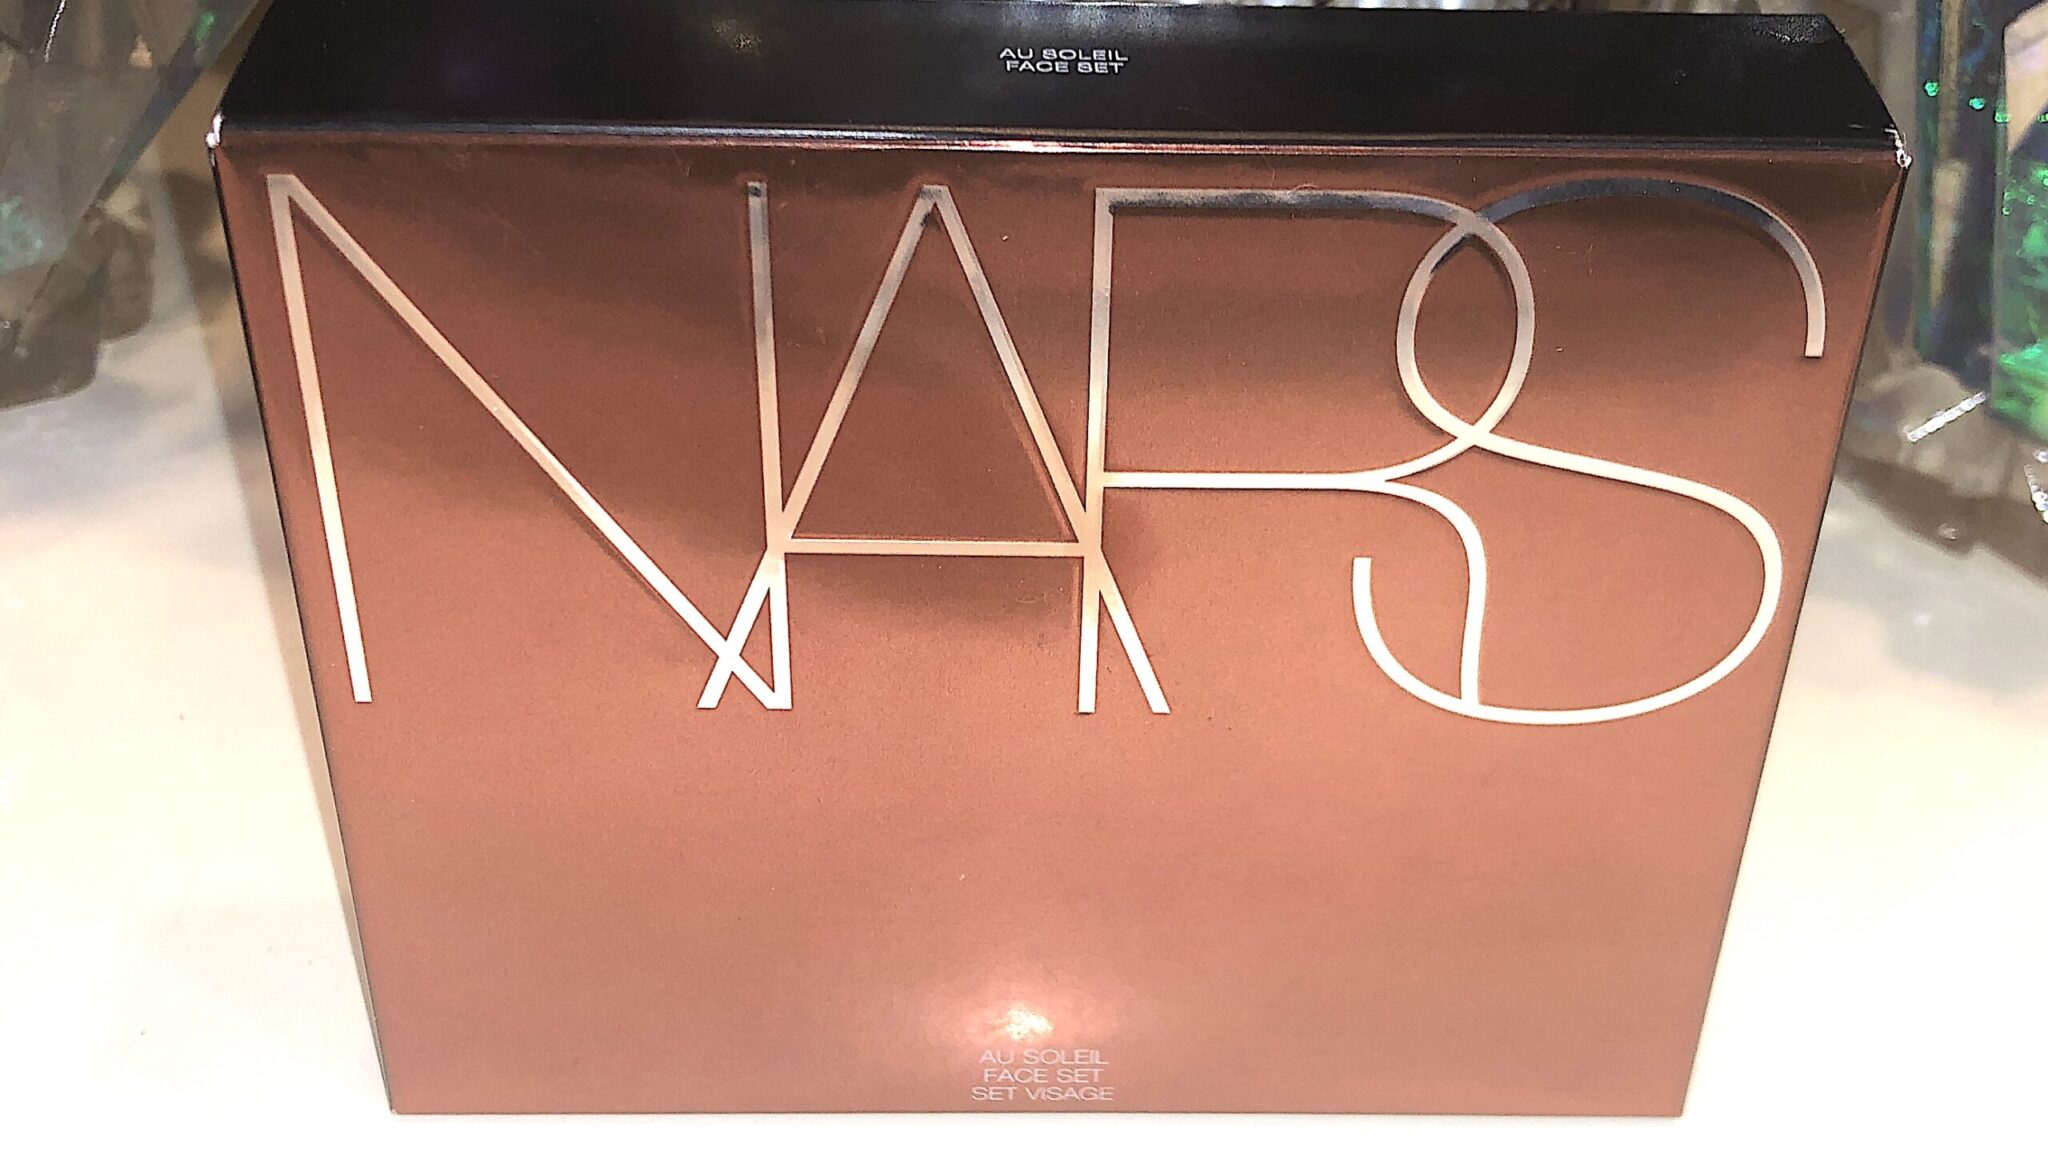 NARS AU SOLEIL FACE SET OUTERPACKAGING